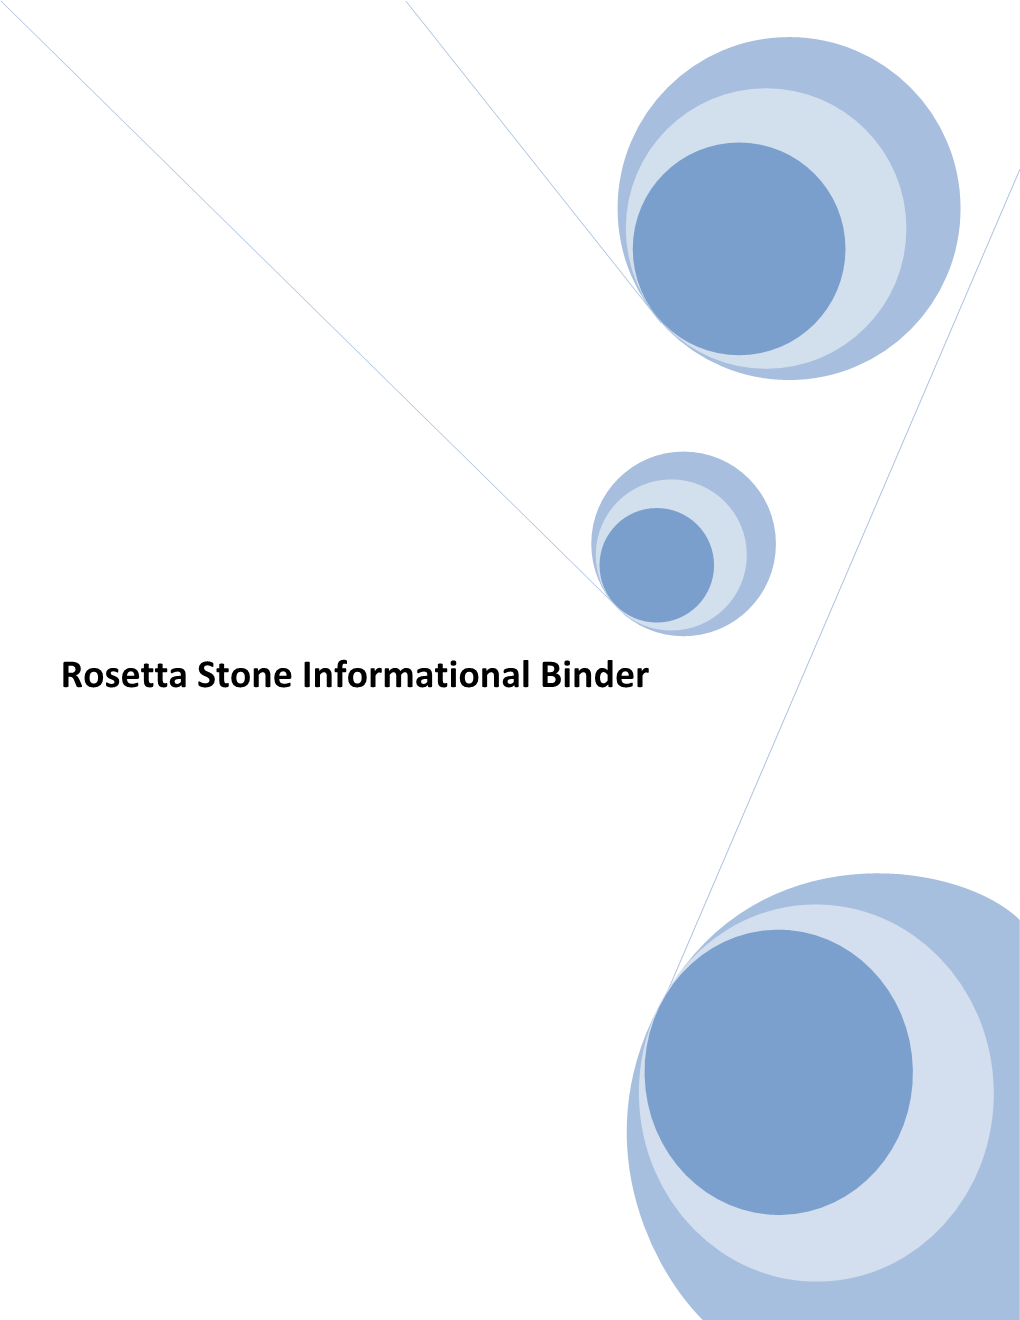 Rosetta Stone Informational Binder Contents Expectations